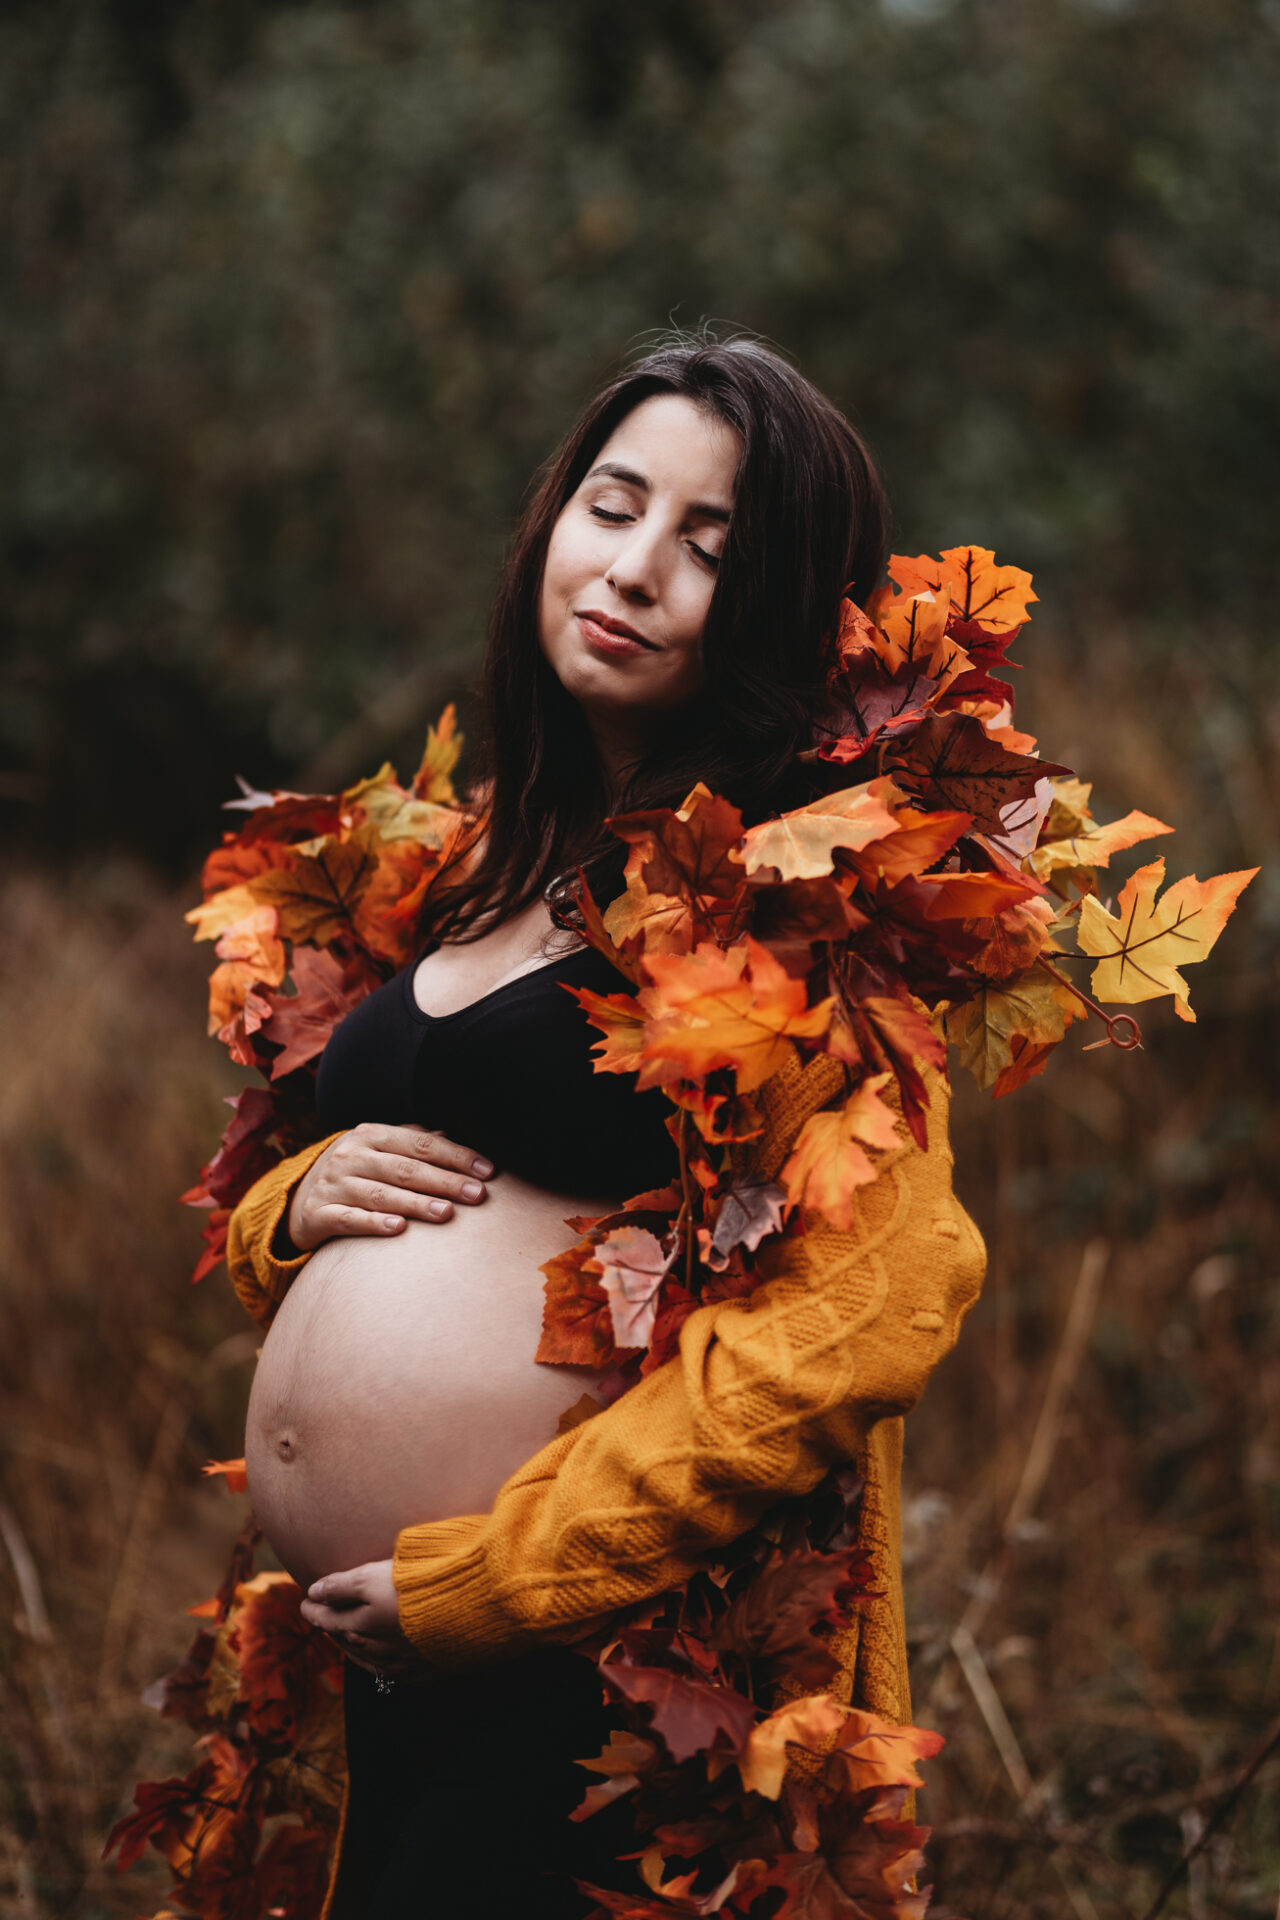 northern virginia creative maternity photo with fall leaf garland